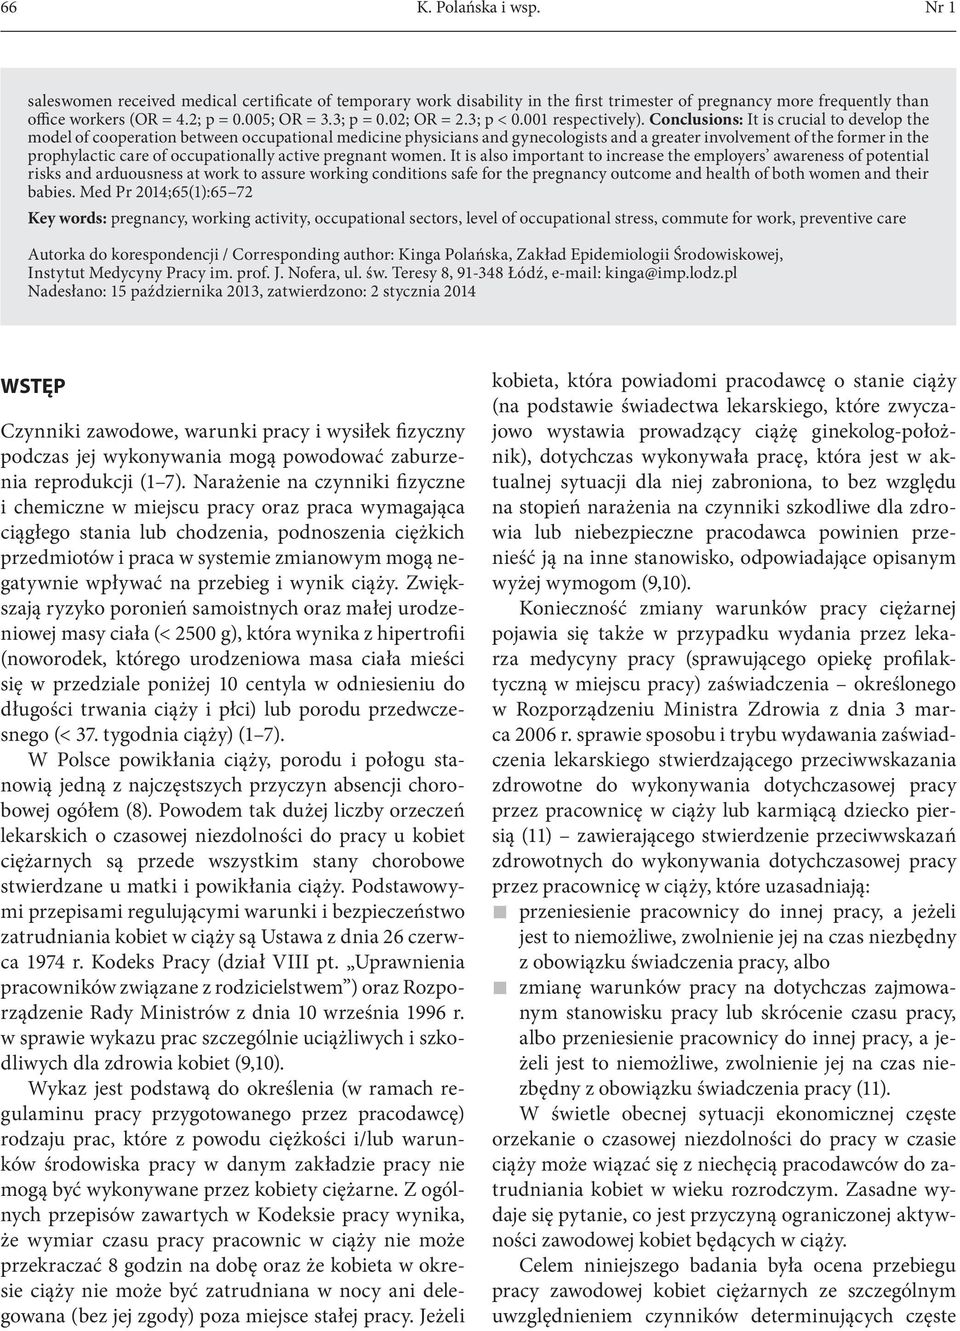 Conclusions: It is crucial to develop the model of cooperation between occupational medicine physicians and gynecologists and a greater involvement of the former in the prophylactic care of